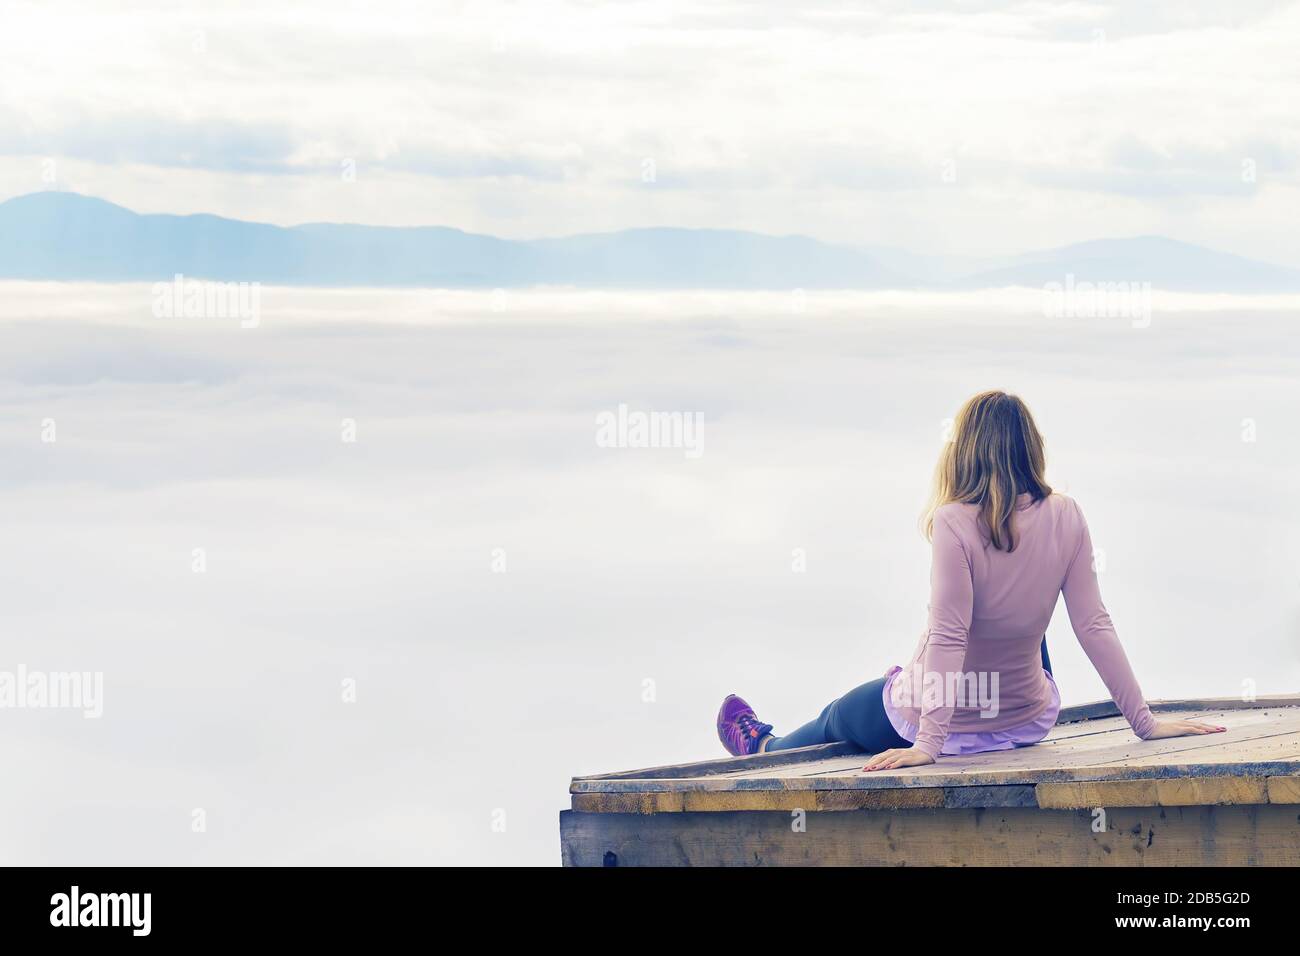 Woman in sporty clothing resting on a wooden platform and enjoying the view of fog covered valley below. Hiking, achievement, expectation, optimism an Stock Photo